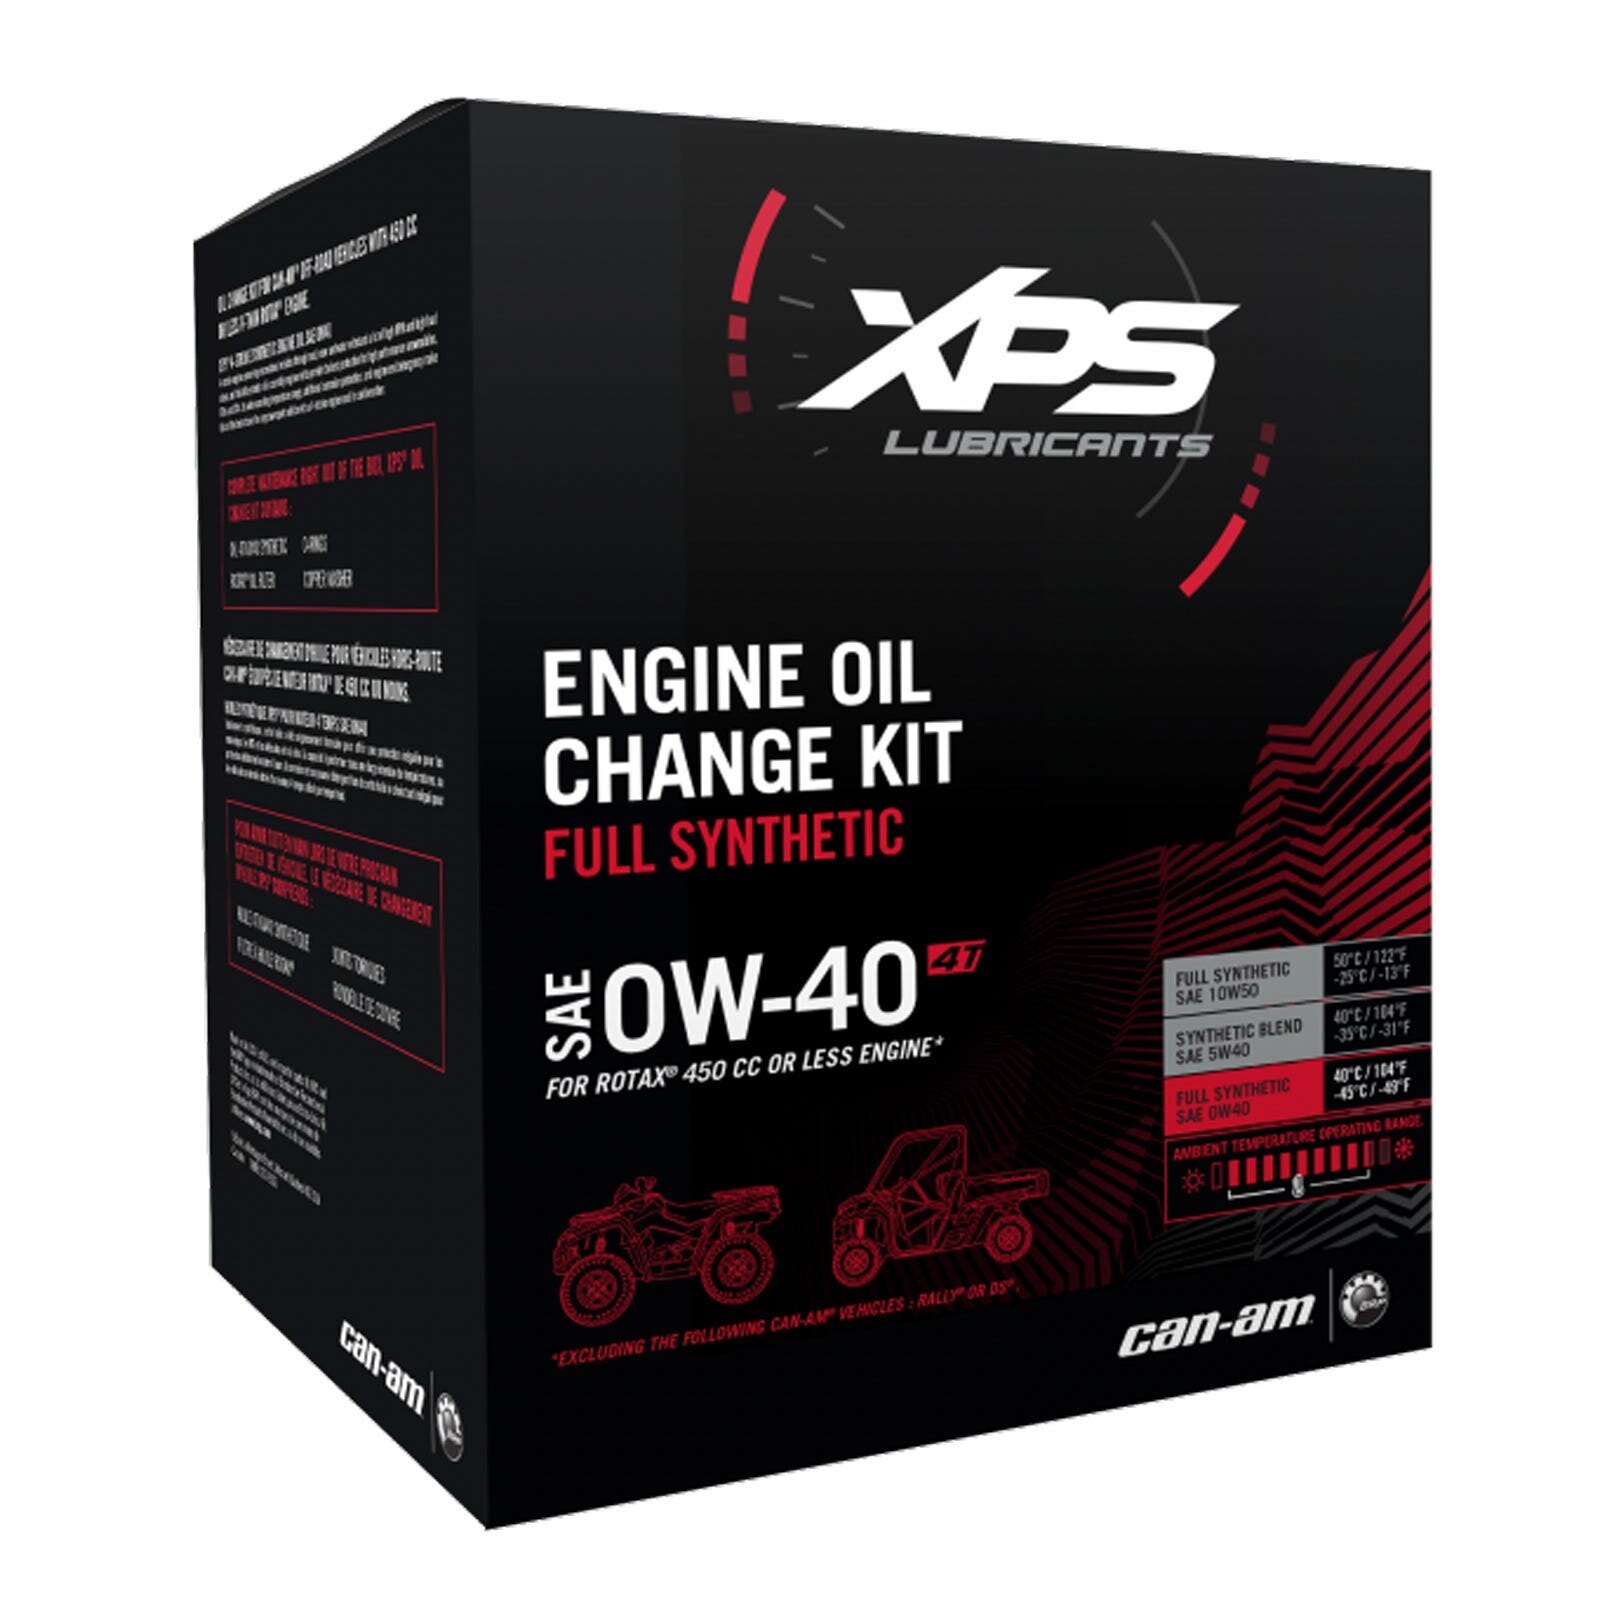 4T 0W 40 Synthetic Oil Change Kit for Rotax 450 cc or less engine